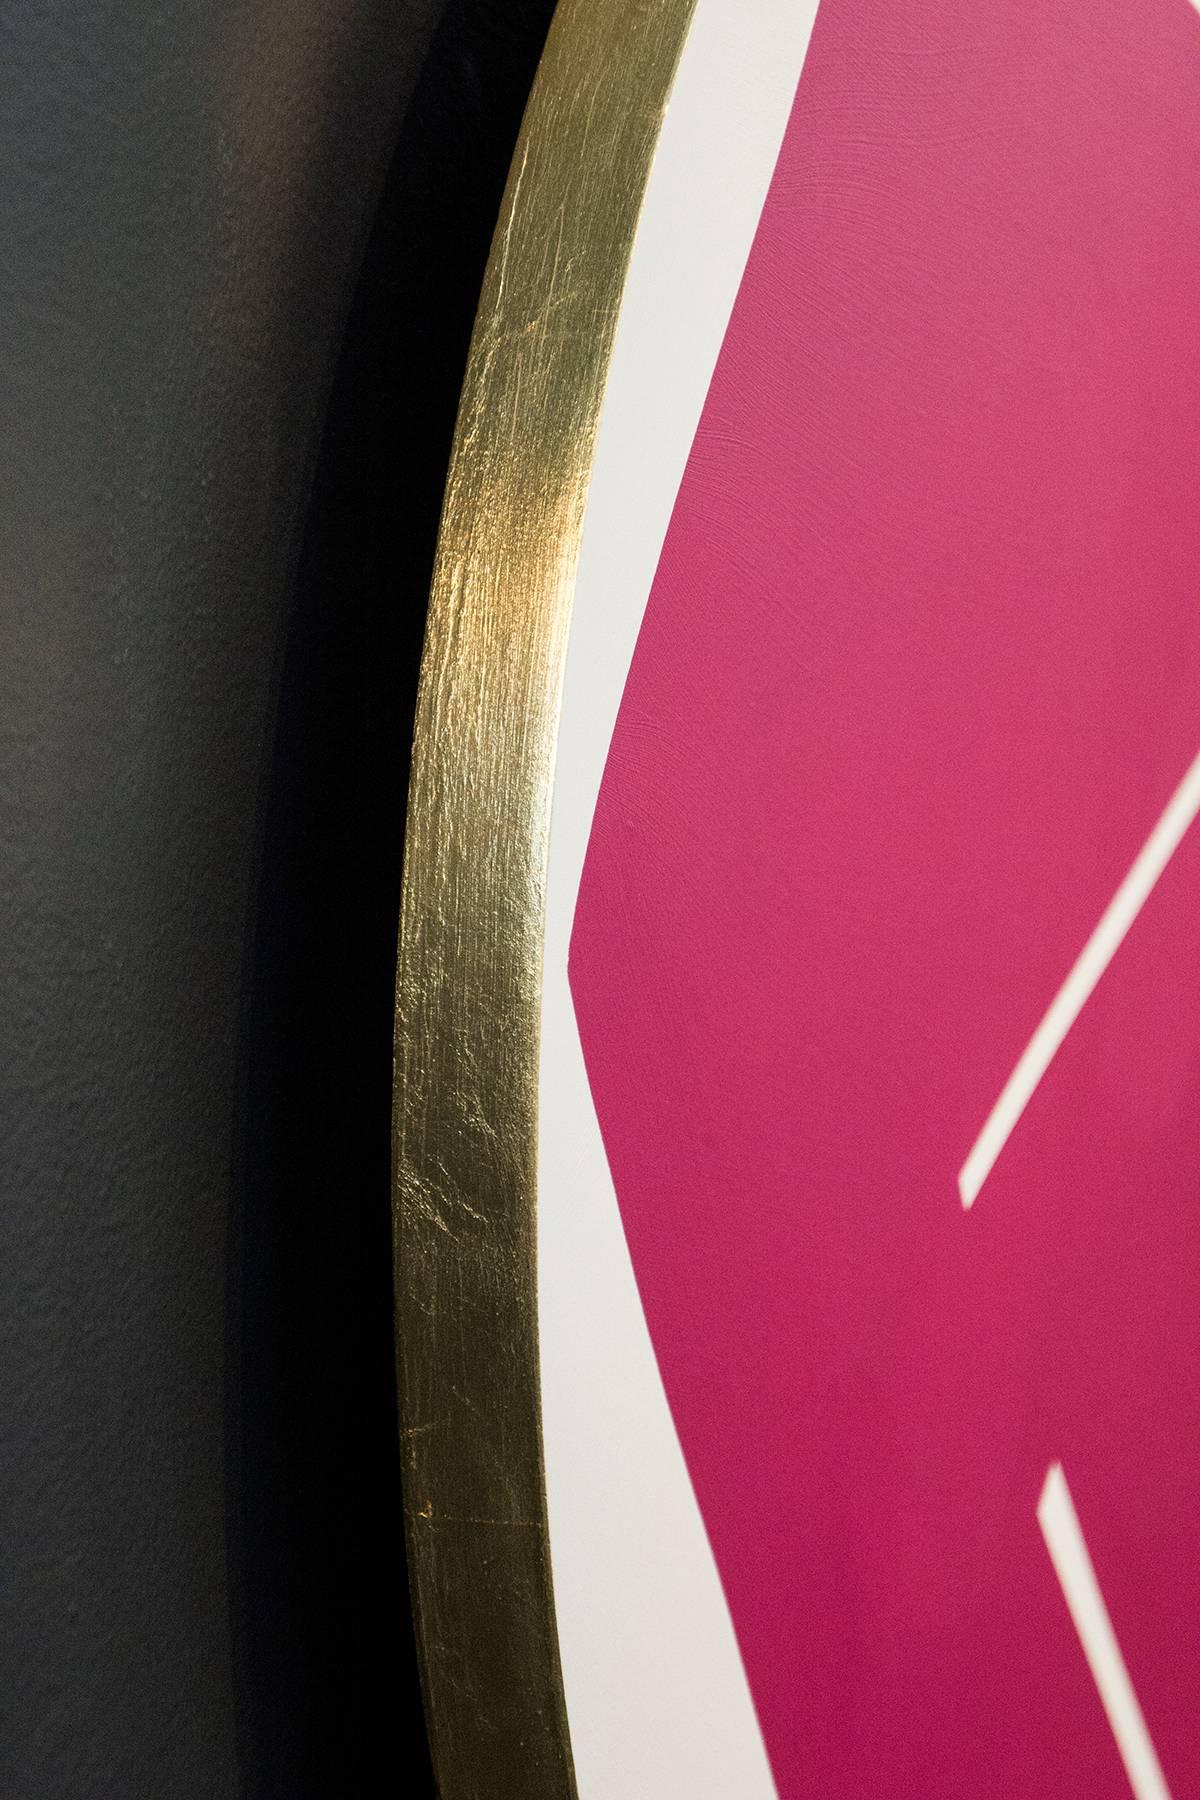 Round Magenta with Two Lines - colourful, gold leaf edge, acrylic tondo on panel - Abstract Painting by Aron Hill